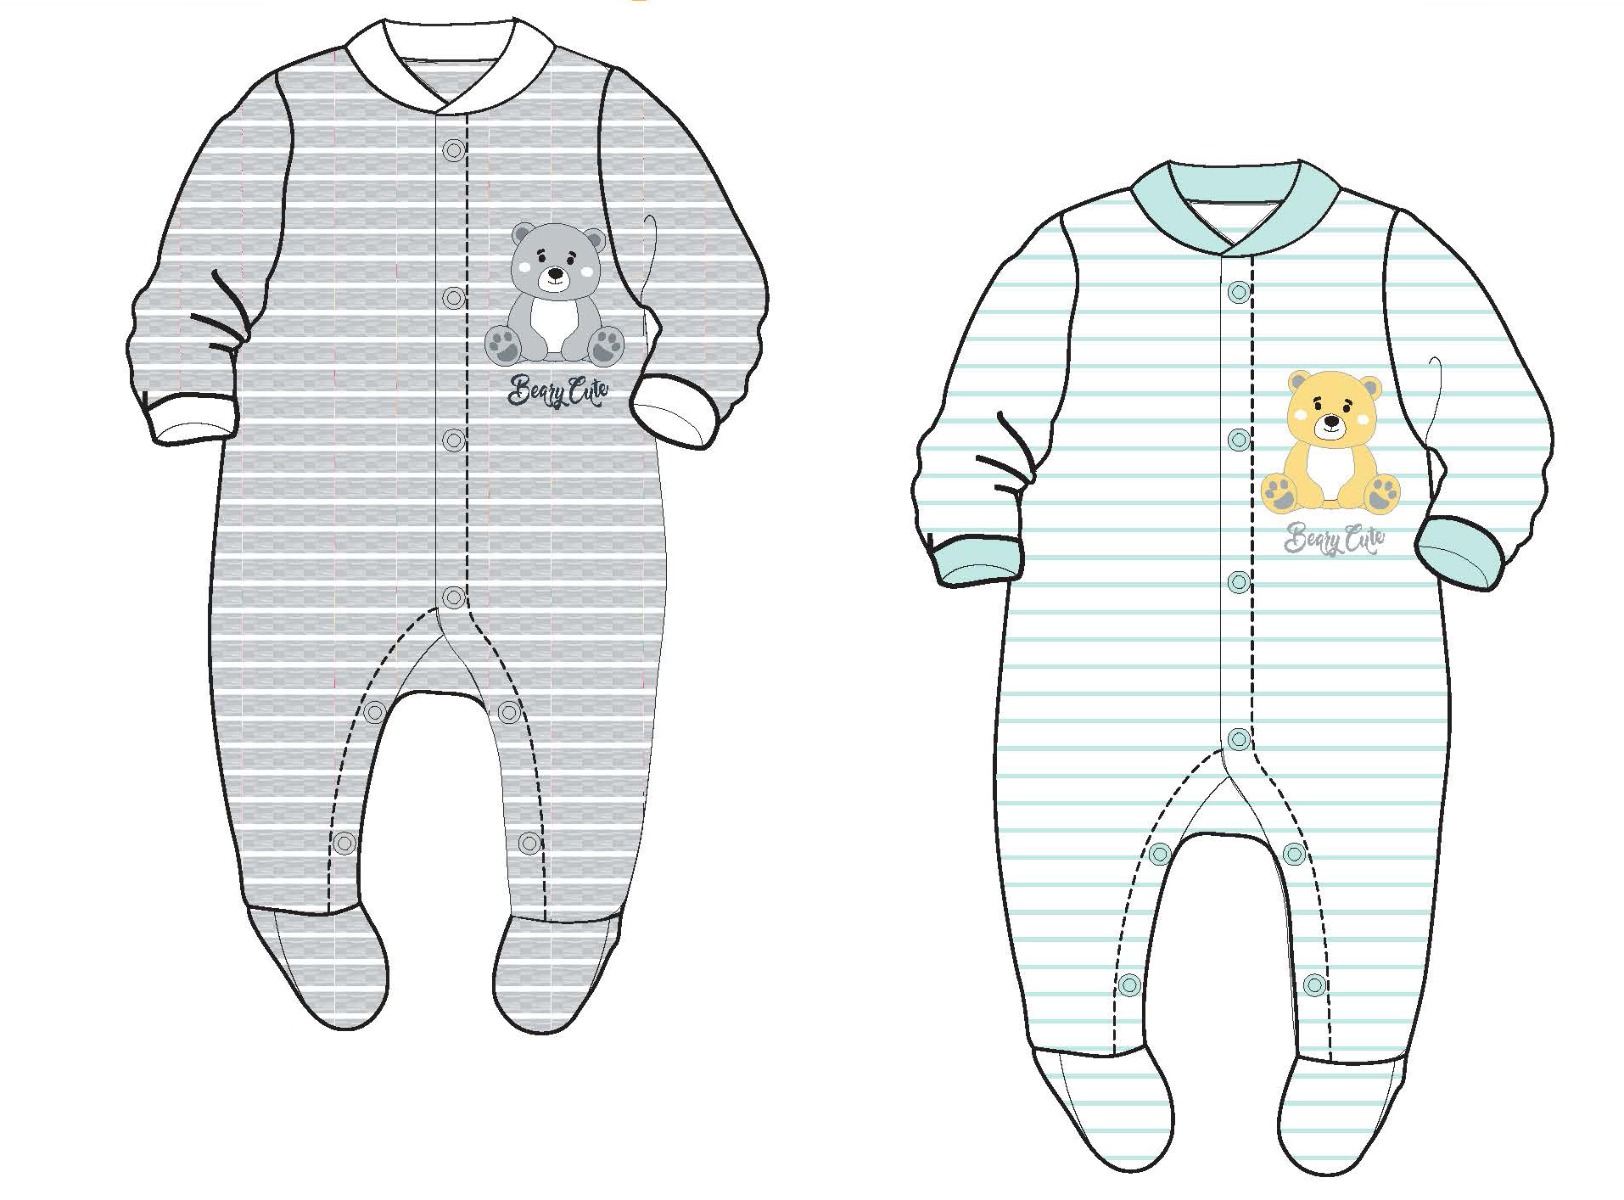 Gender Neutral Baby's Knit Striped Footed PAJAMAS w/ Teddy Bear Print